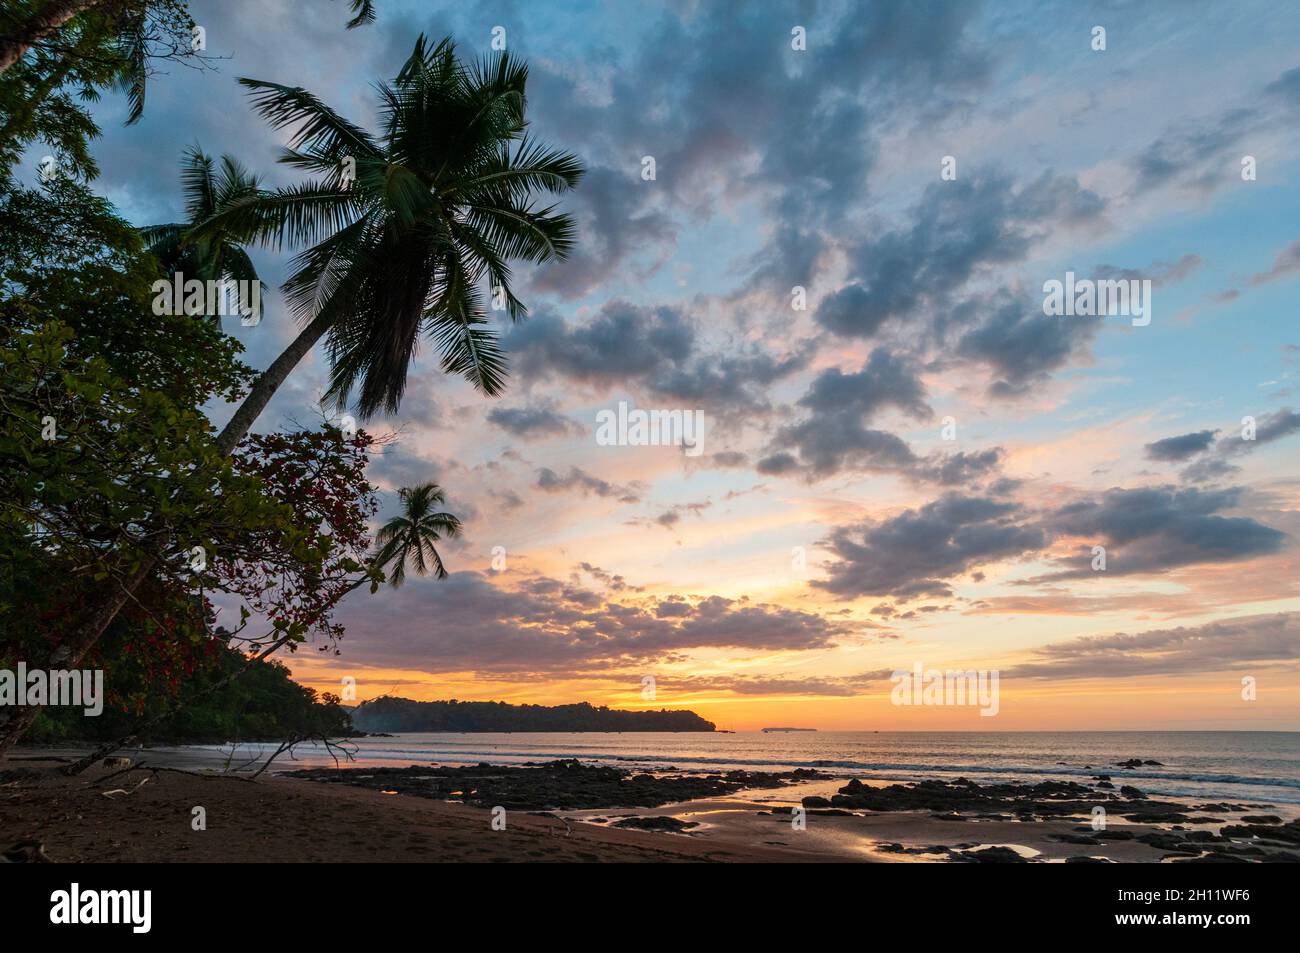 A palm tree-lined beach with gentle surf at sunset. Drake Bay, Osa Peninsula, Costa Rica. Stock Photo